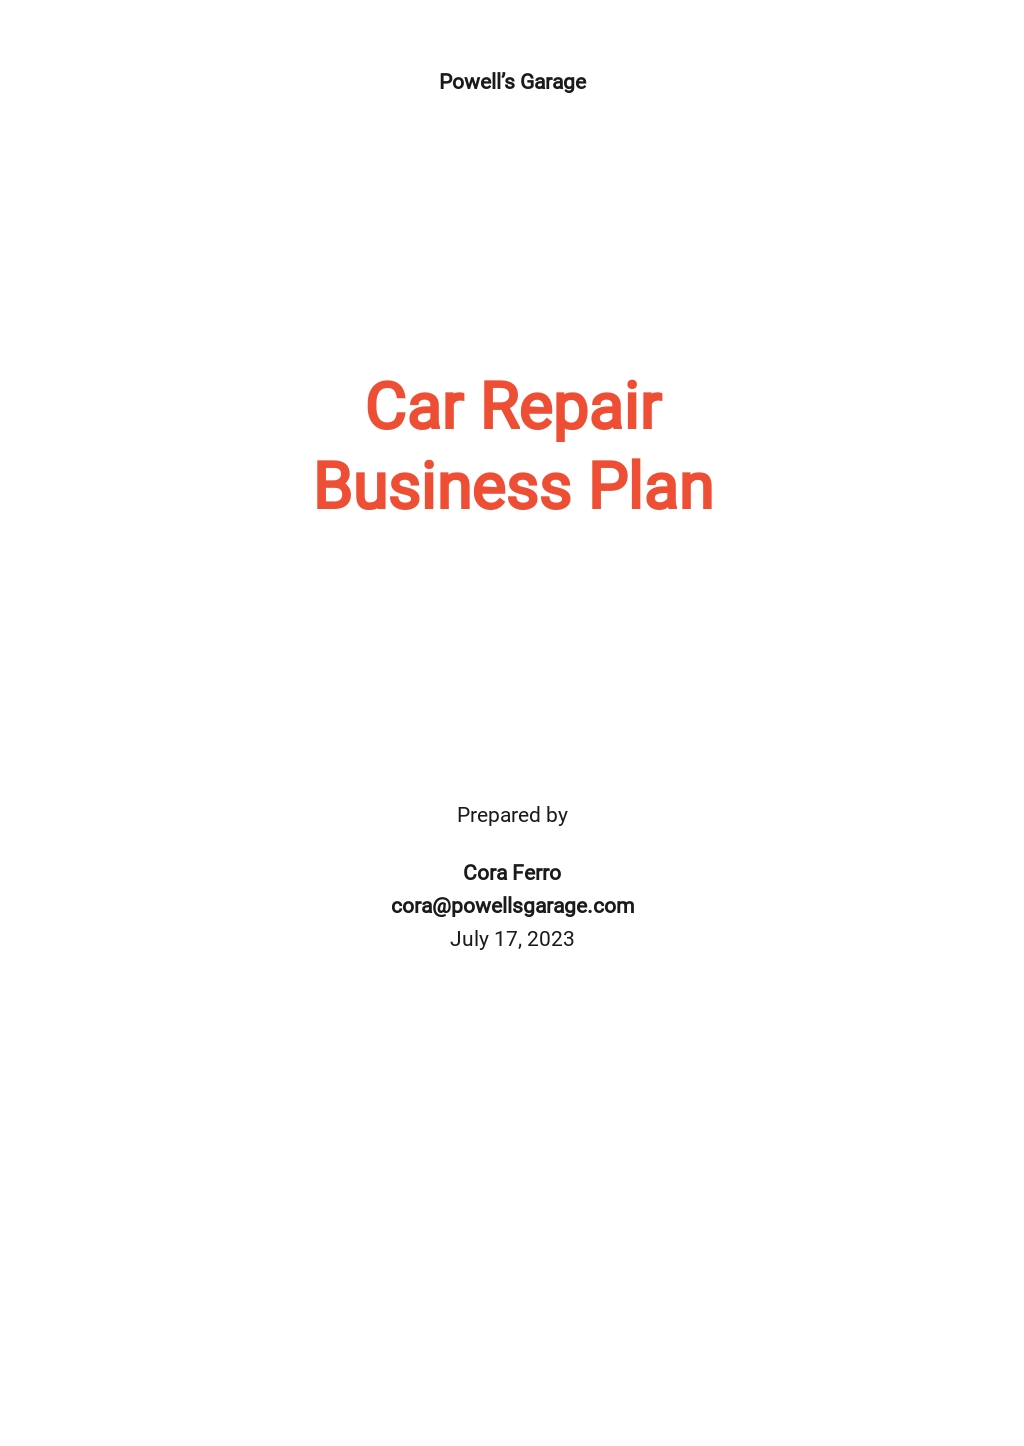 business plan for a car was